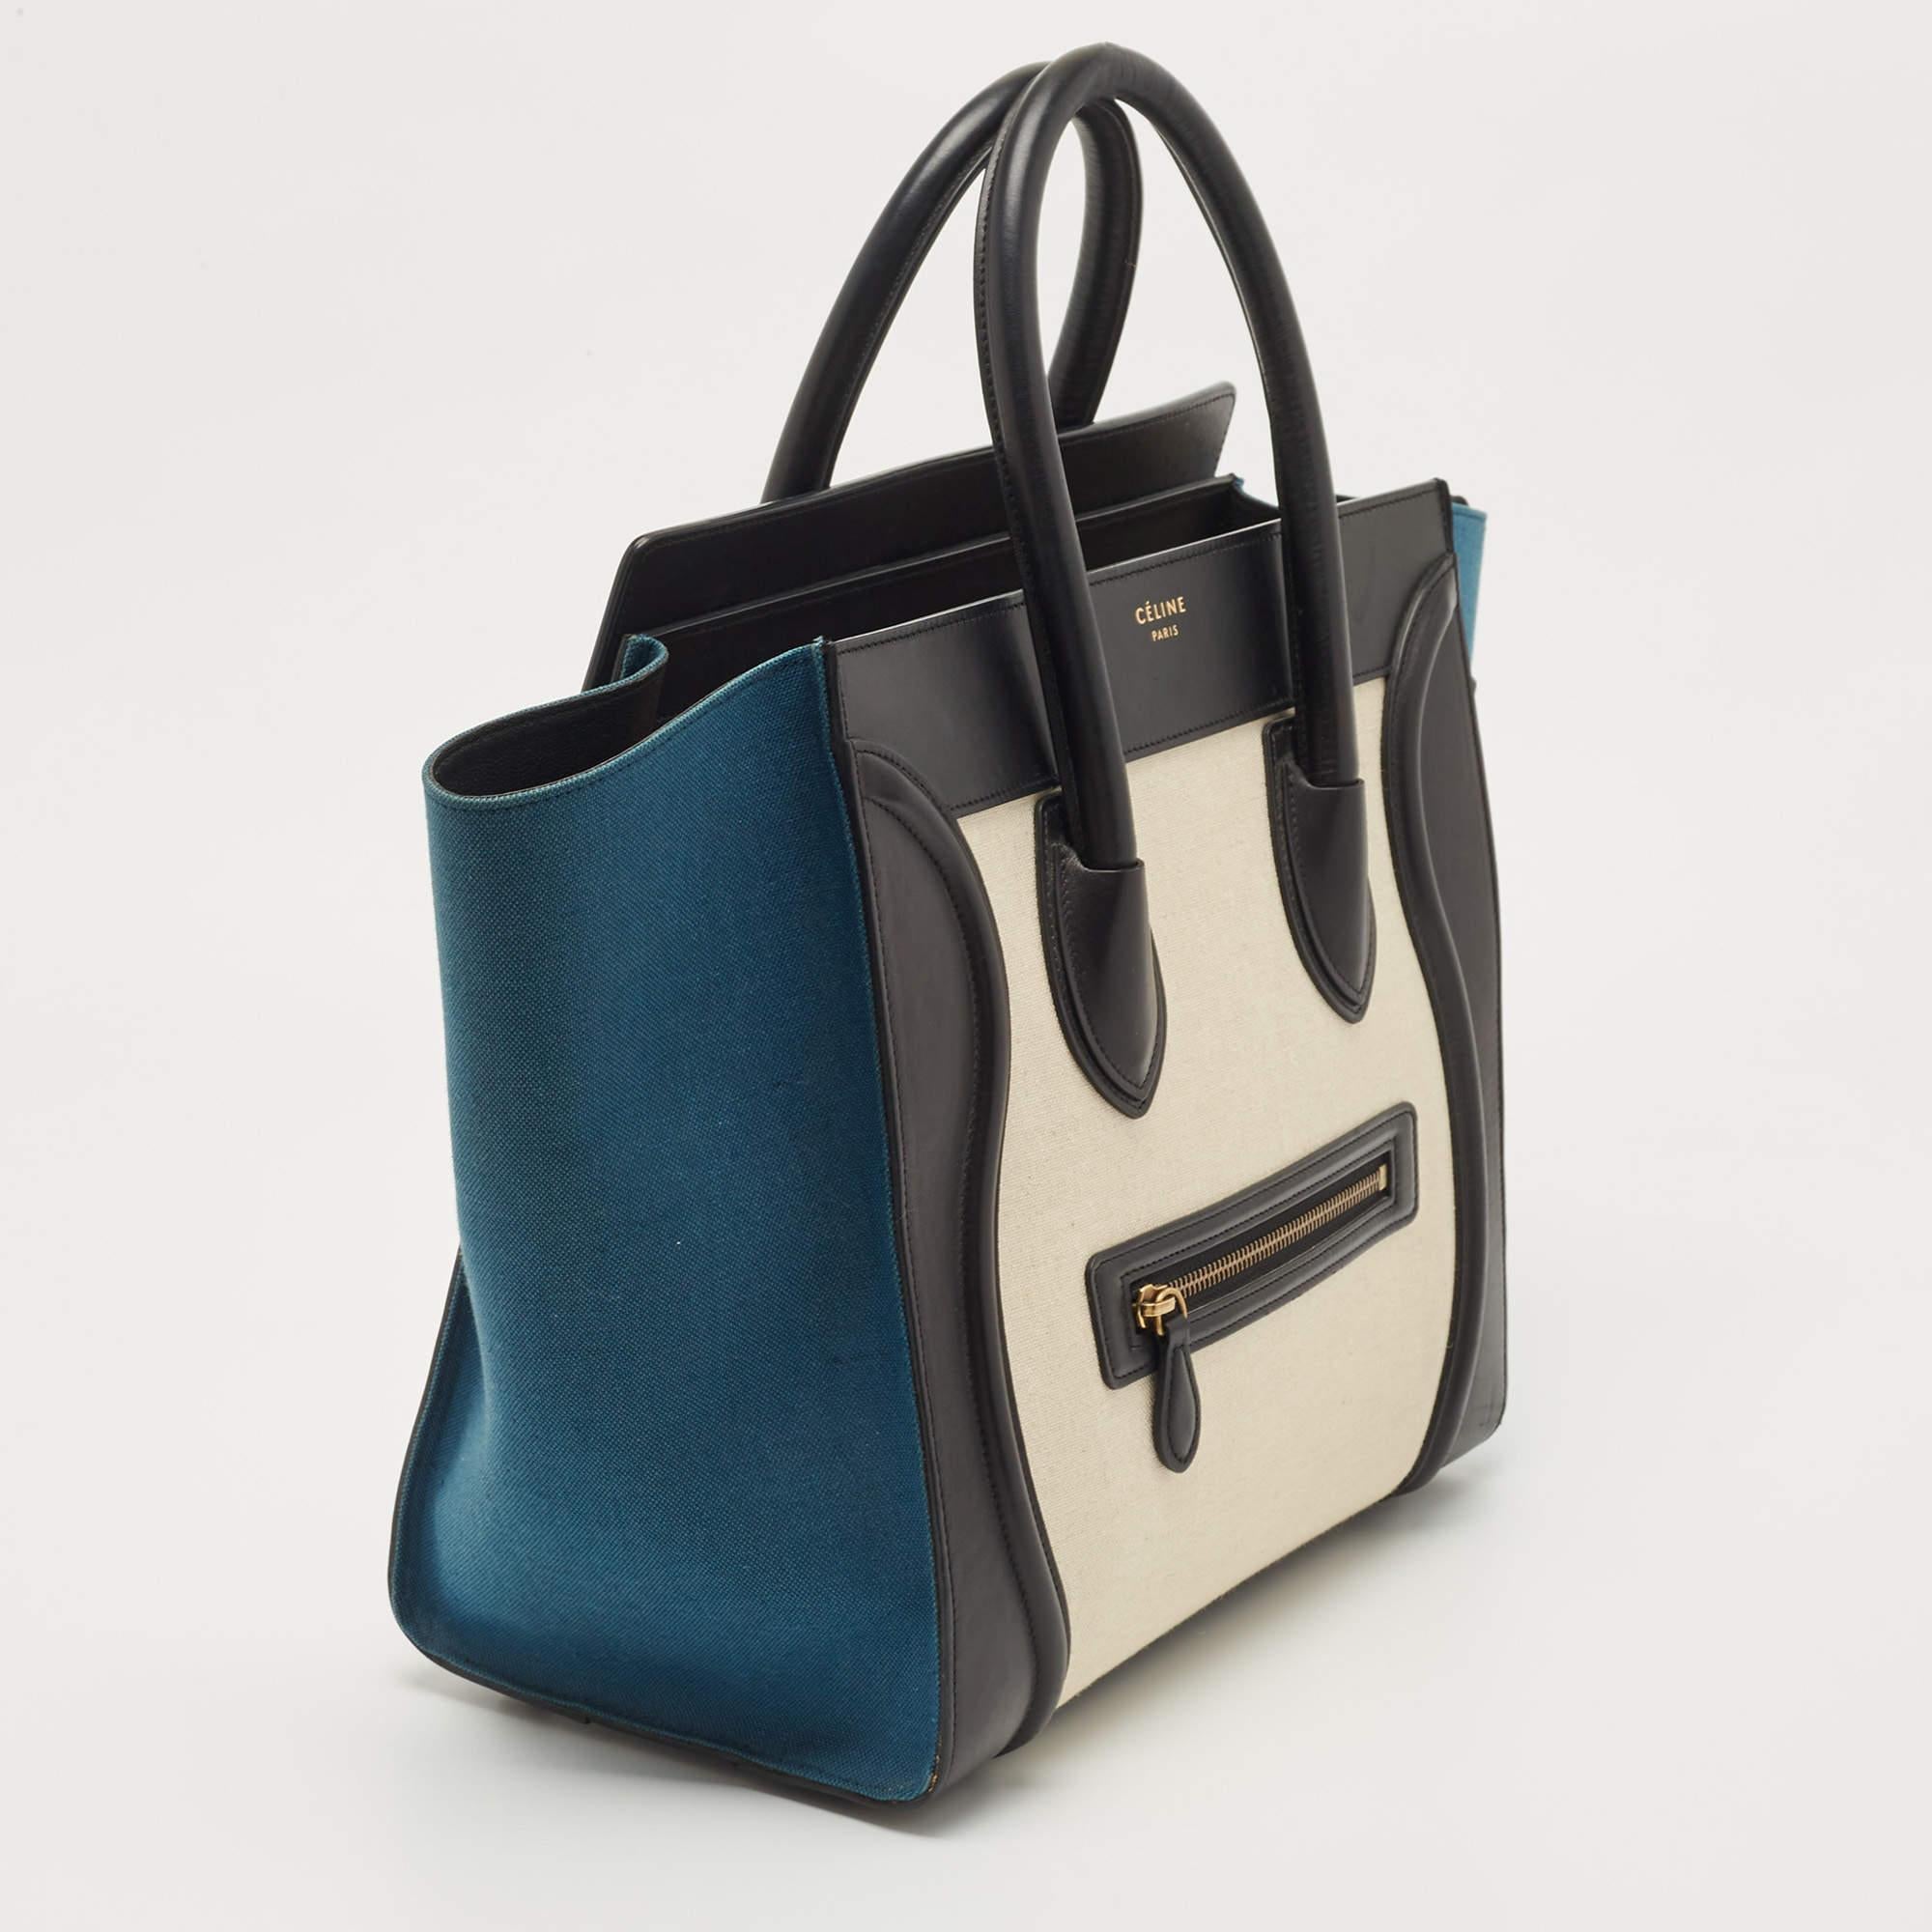 The Céline Luggage tote is a luxurious fashion accessory, featuring a blend of high-quality canvas and leather materials. This compact yet stylish tote showcases a tricolor design, with contrasting panels of canvas and leather, and is adorned with